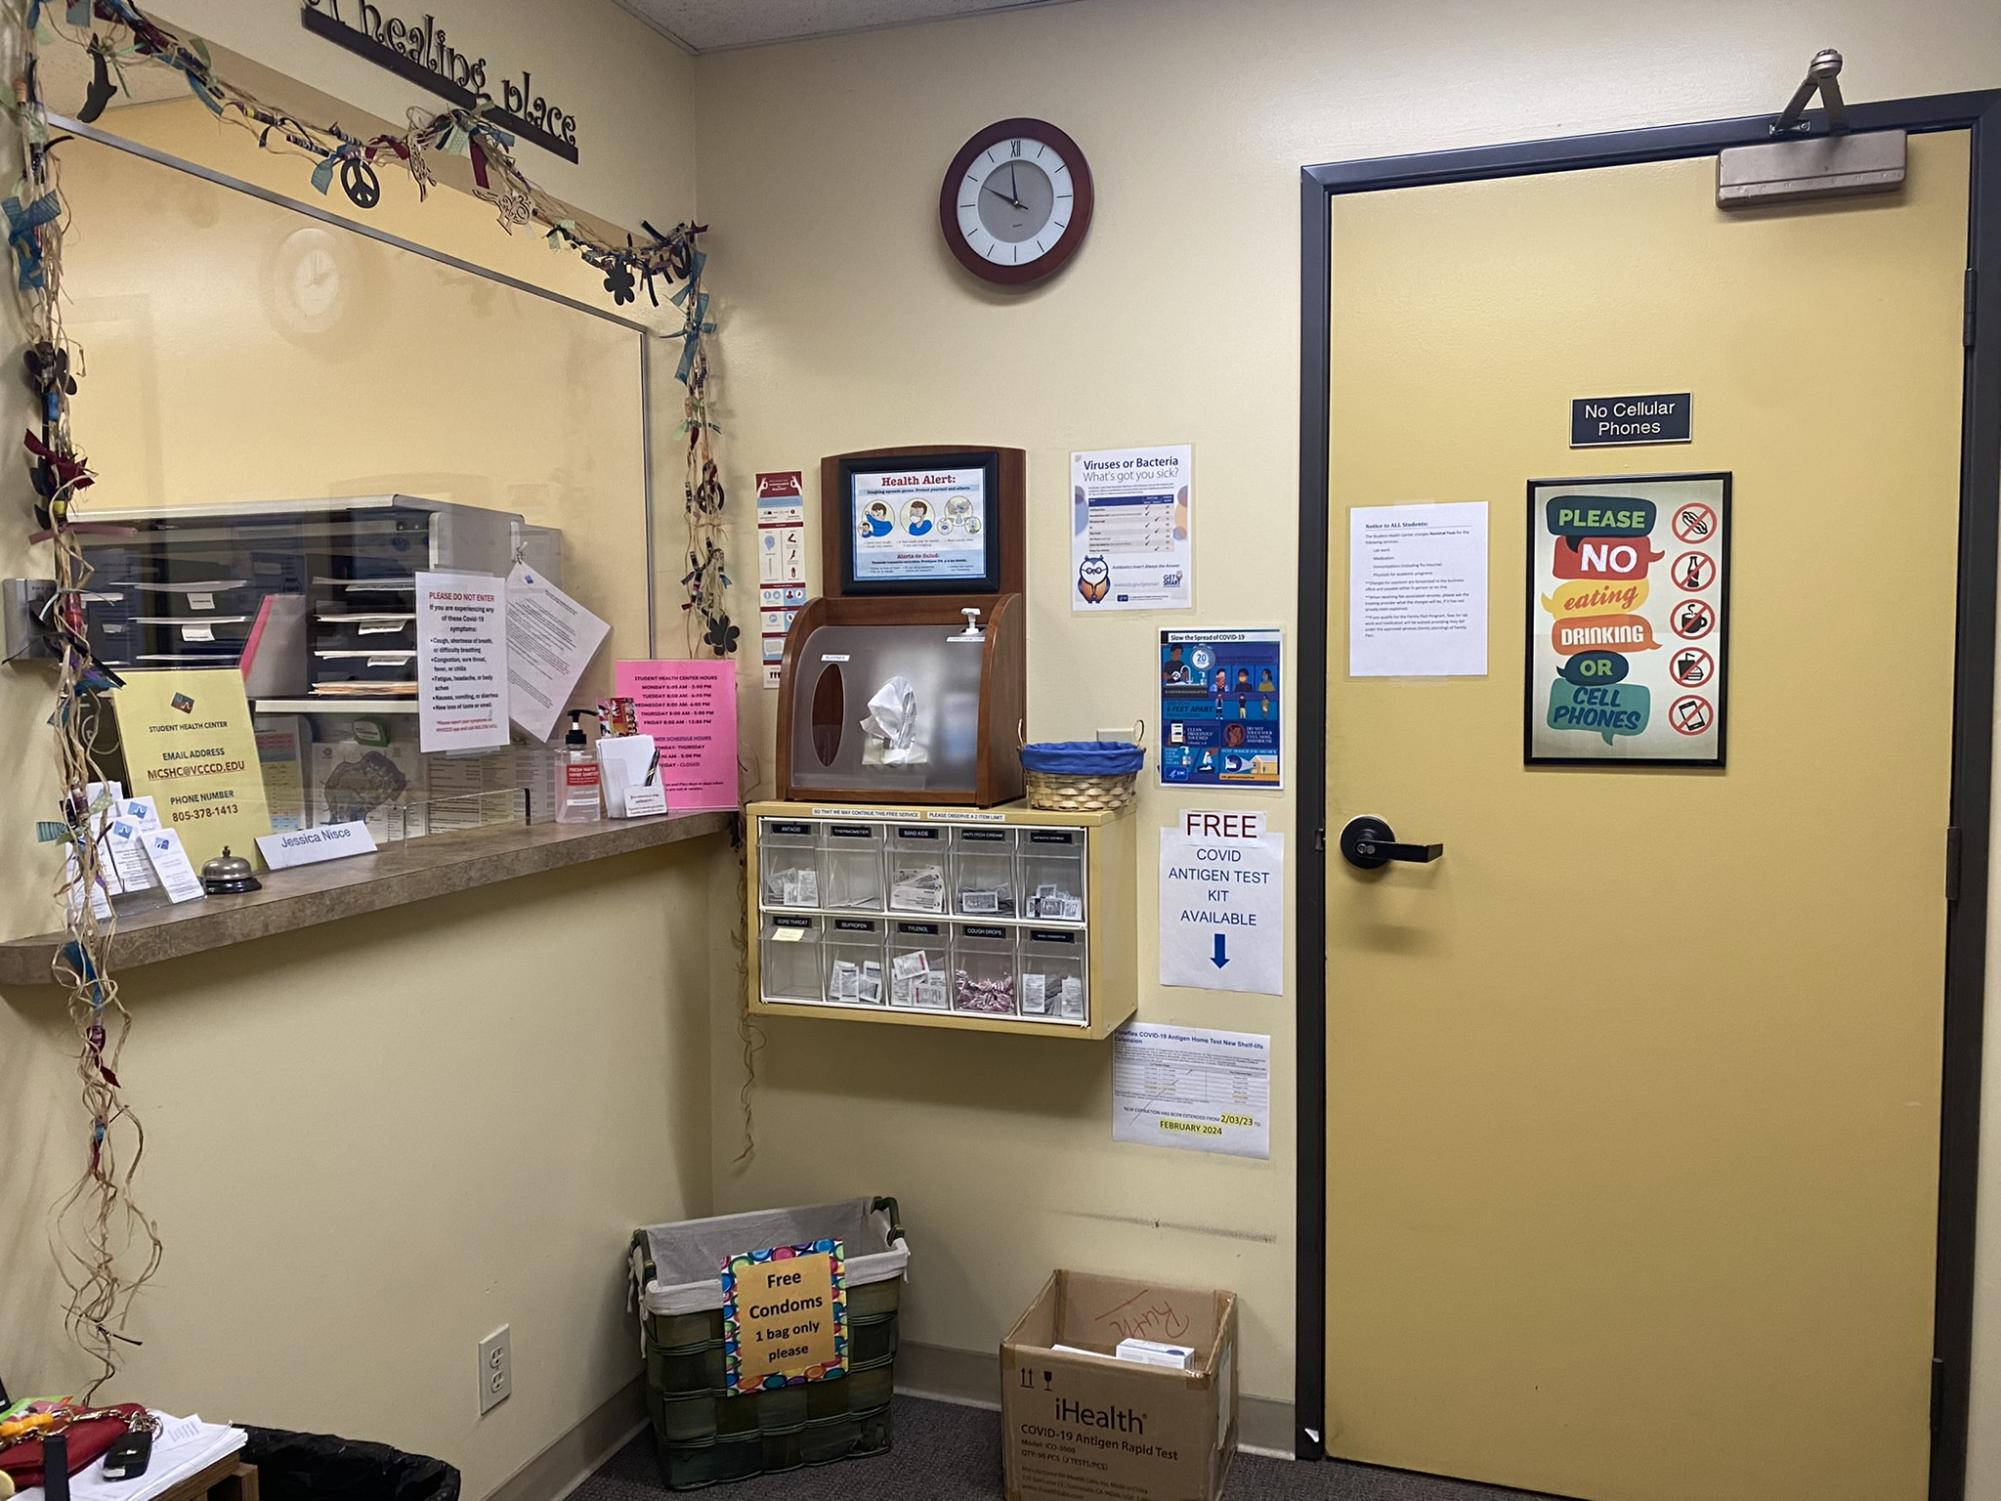 The waiting room for the Moorpark College Student Health Center where students can grab free resources including Advil, condoms and COVID-19 tests.